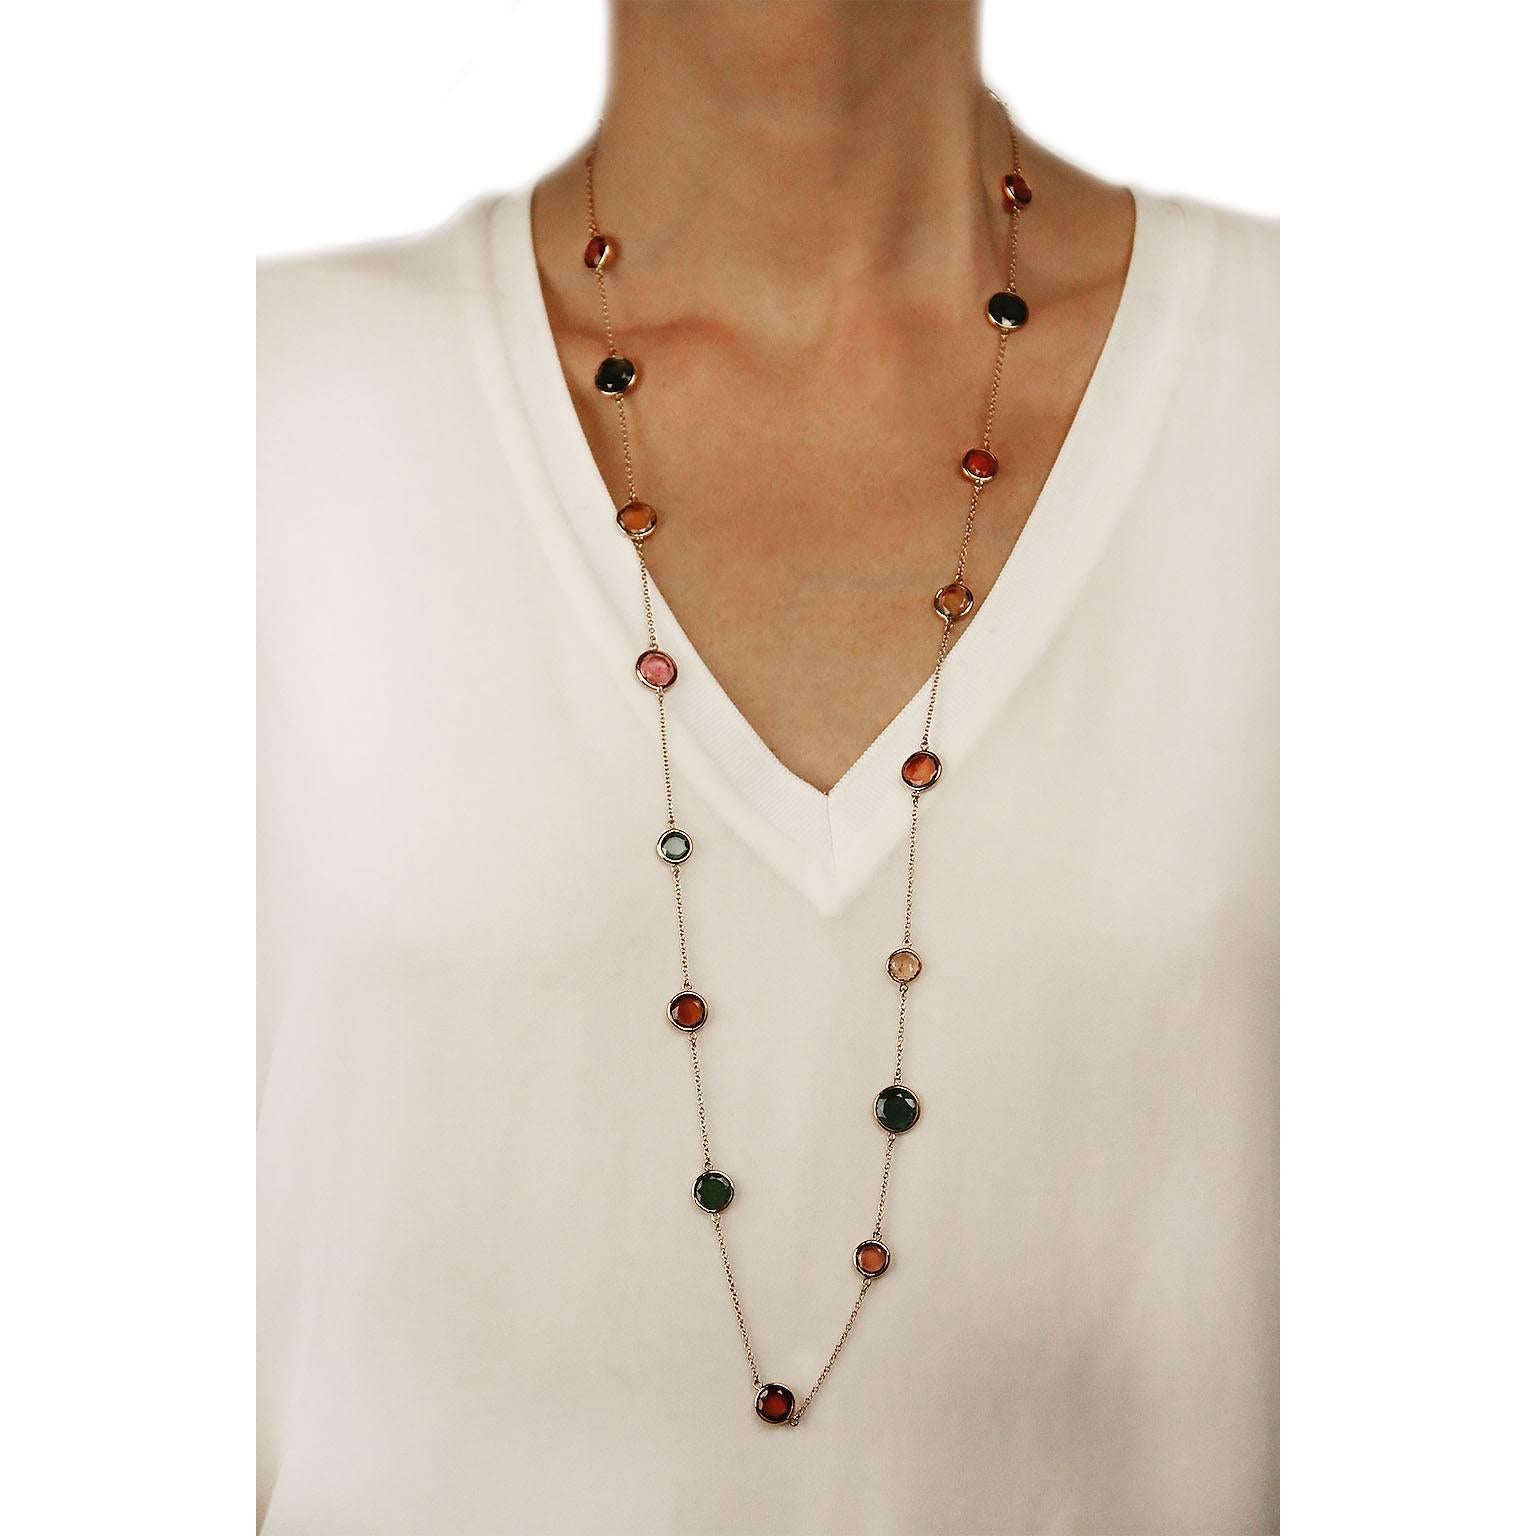 Jona design collection, hand crafted in Italy, 18 karat yellow gold 35 inch-90 cm. long sautoir necklace, accented by 19 multicolor flat cut tourmalines with bezel-set, around the entire design. 
All Jona jewelry is new and has never been previously